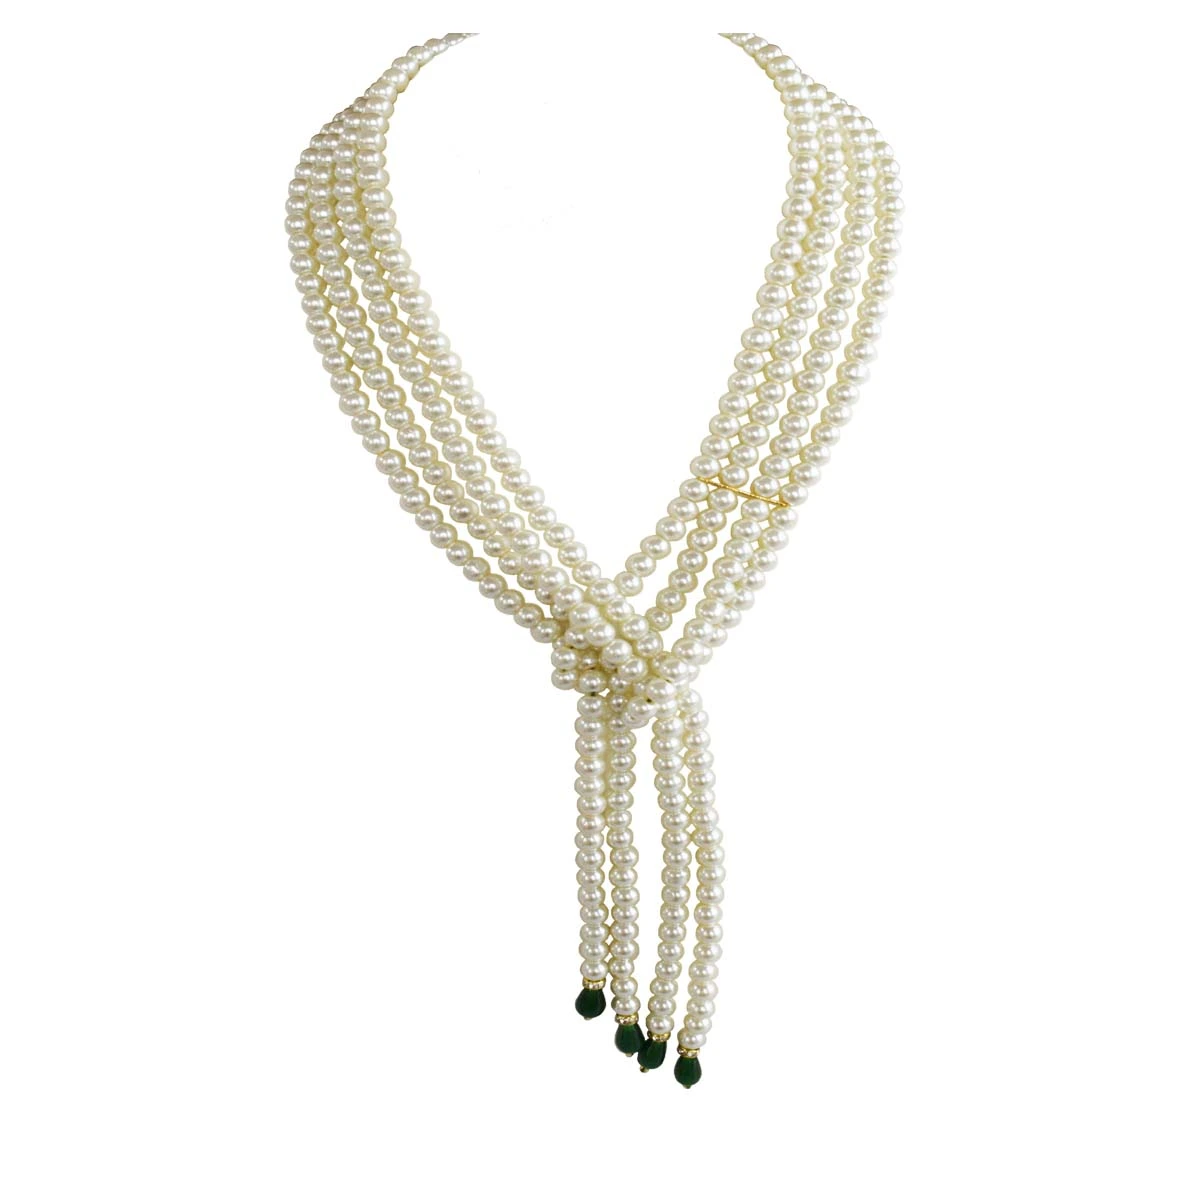 Layered Wrap Around White Shell Pearl Necklace with Green Drop for Women (PS571)